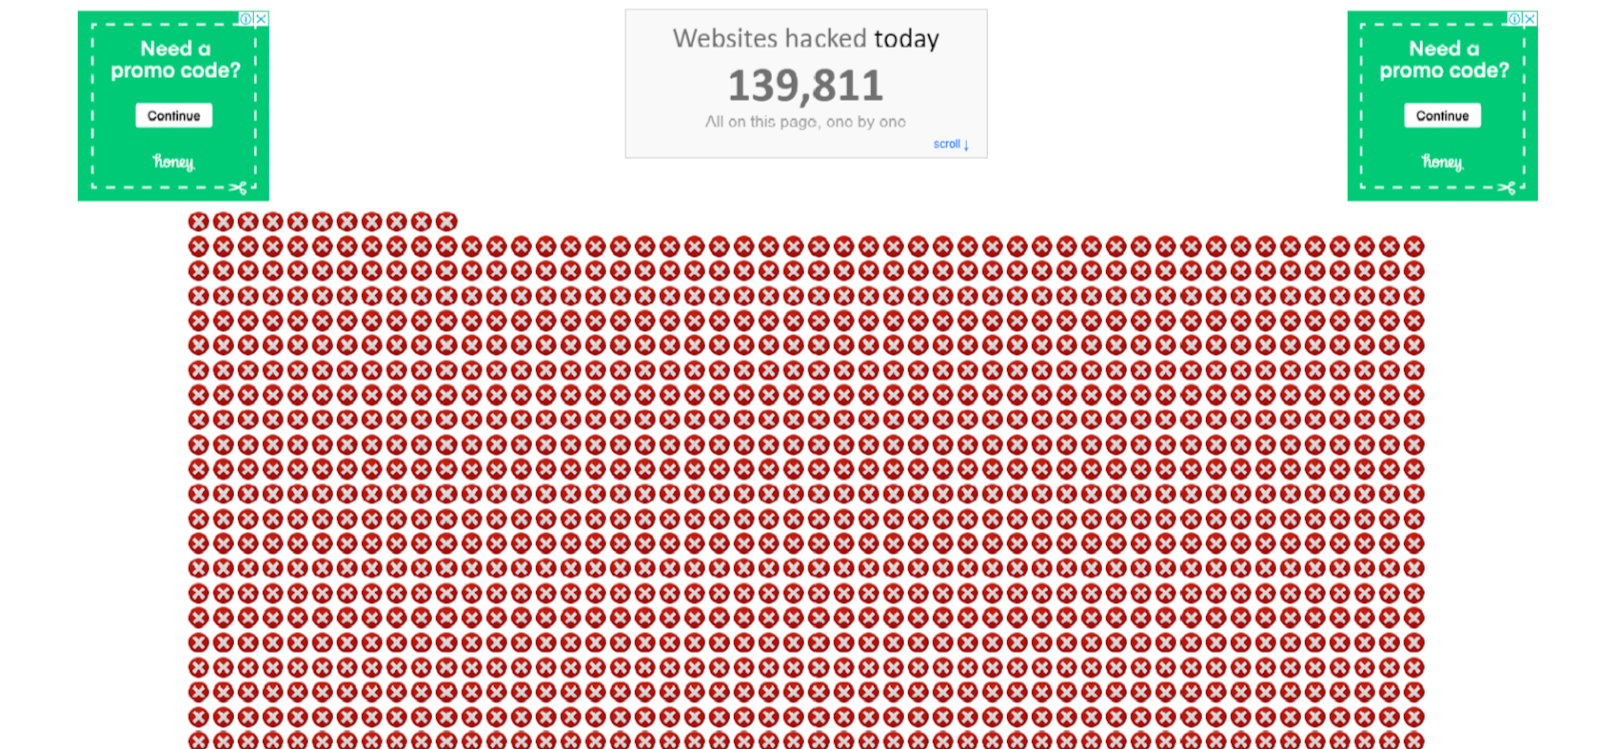 showing total number of website hacked today